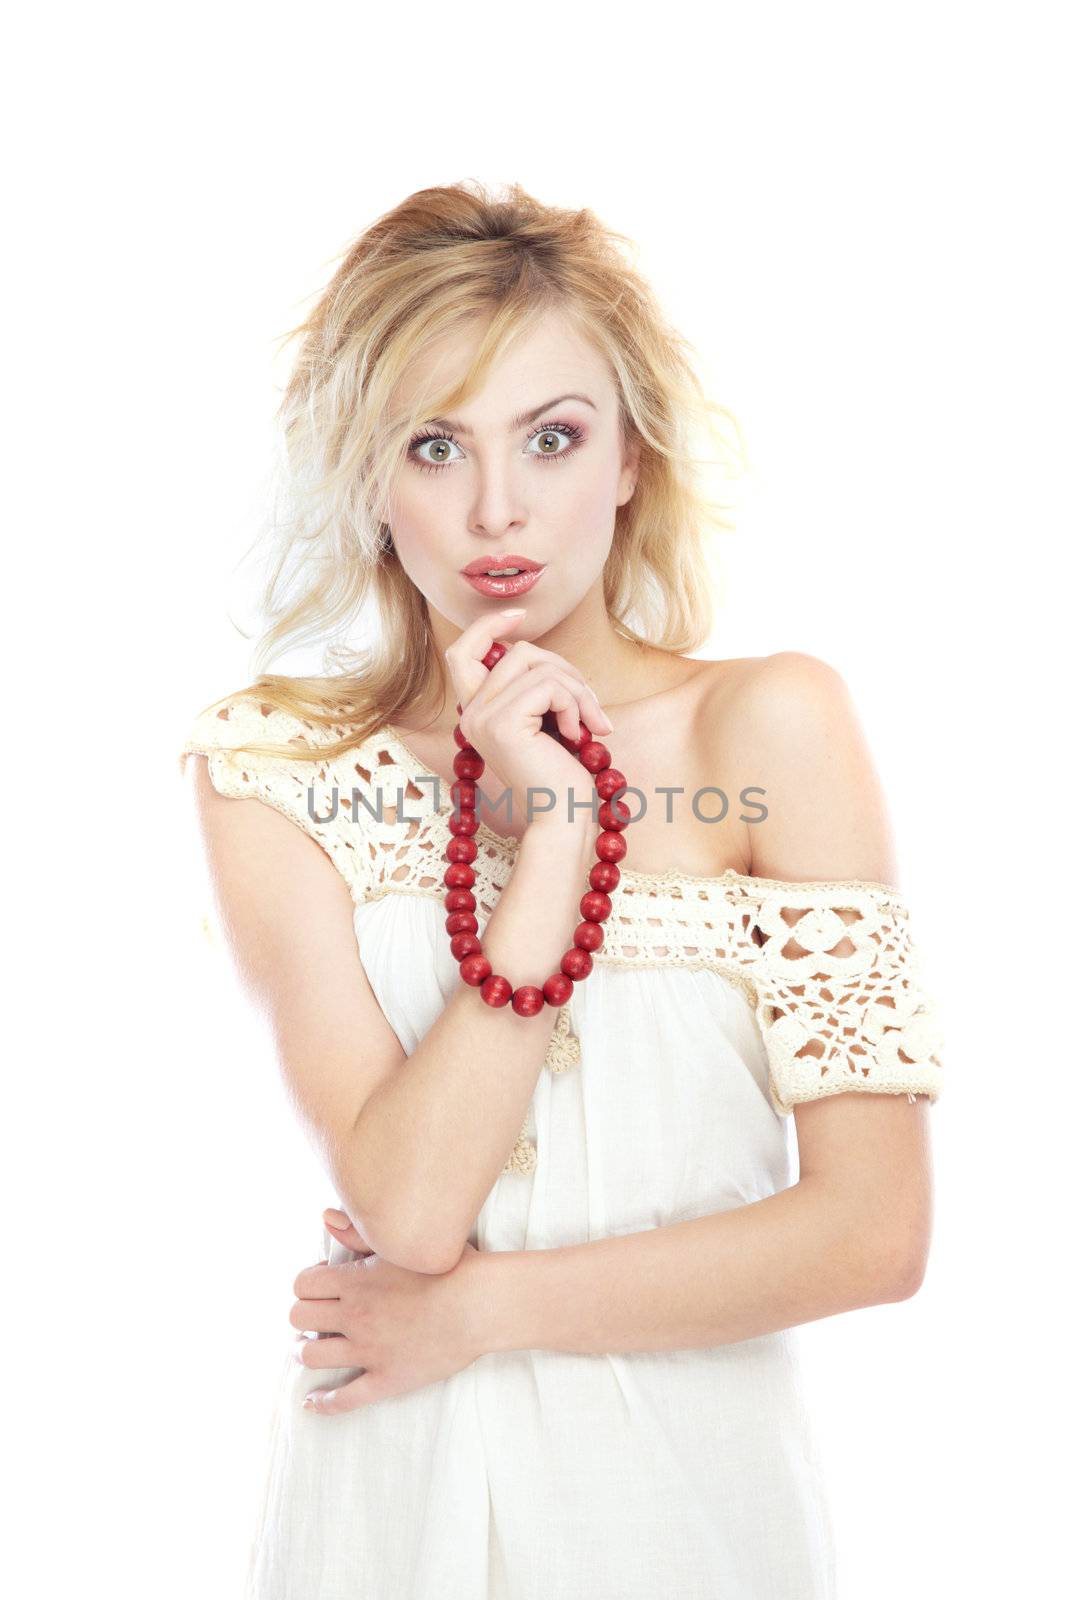 Stylish woman holds red beads on a white background